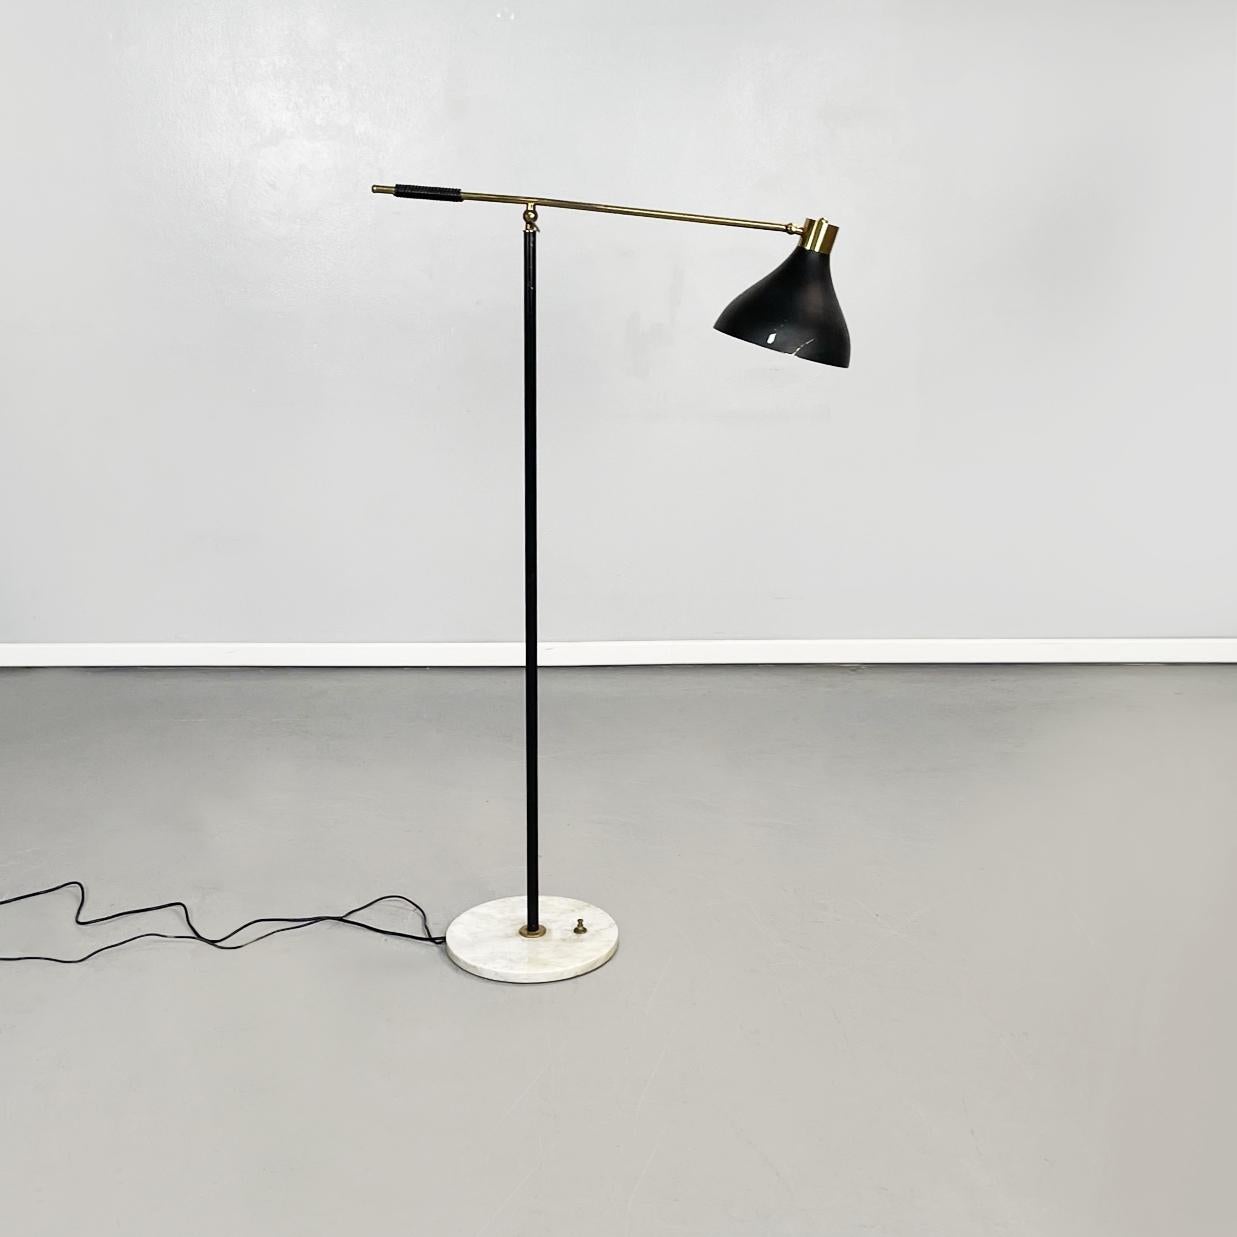 Italian Mid-Century Modern Adjustable Brass Metal Floor Lamp by Stilux, 1950s In Good Condition For Sale In MIlano, IT